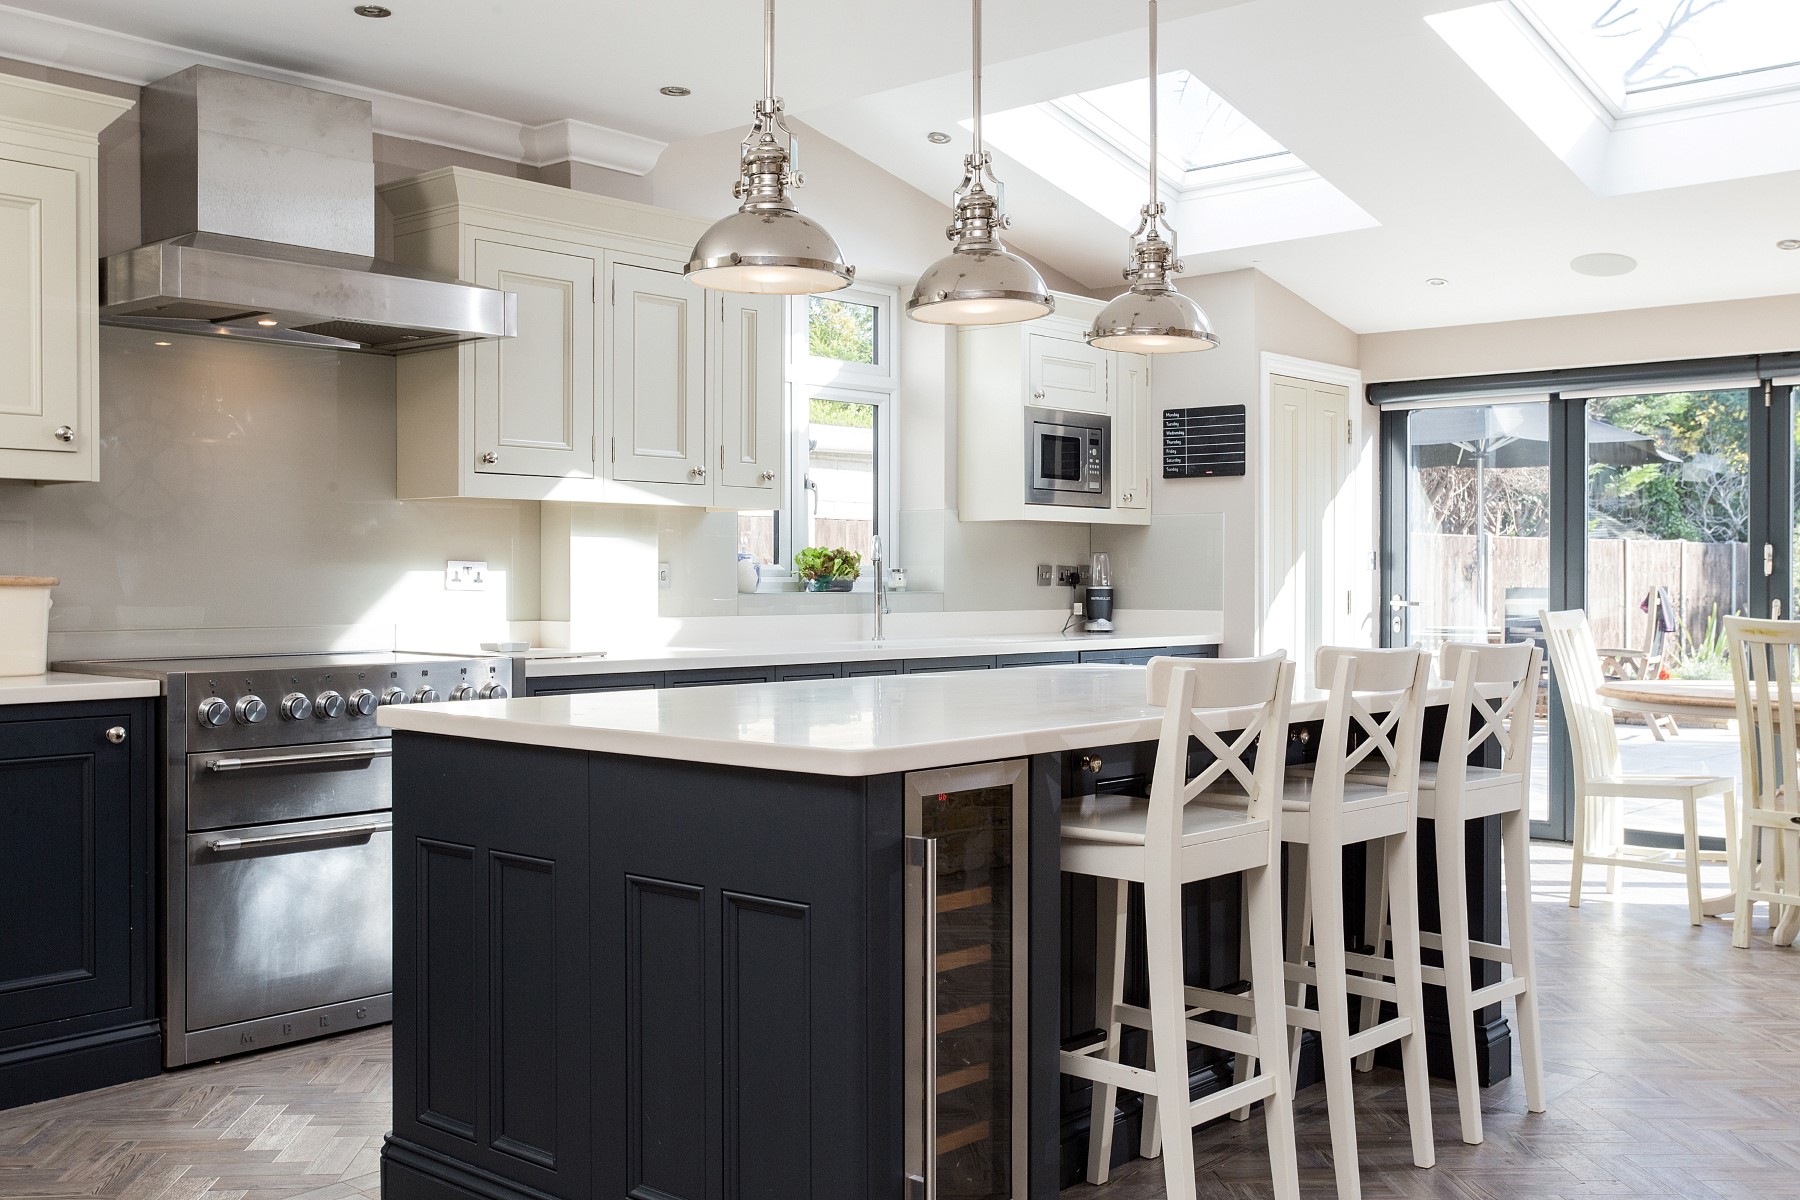 C&C kitchens Hertfordshire - Half Pencil & Scalloped in Charcoal & Almond